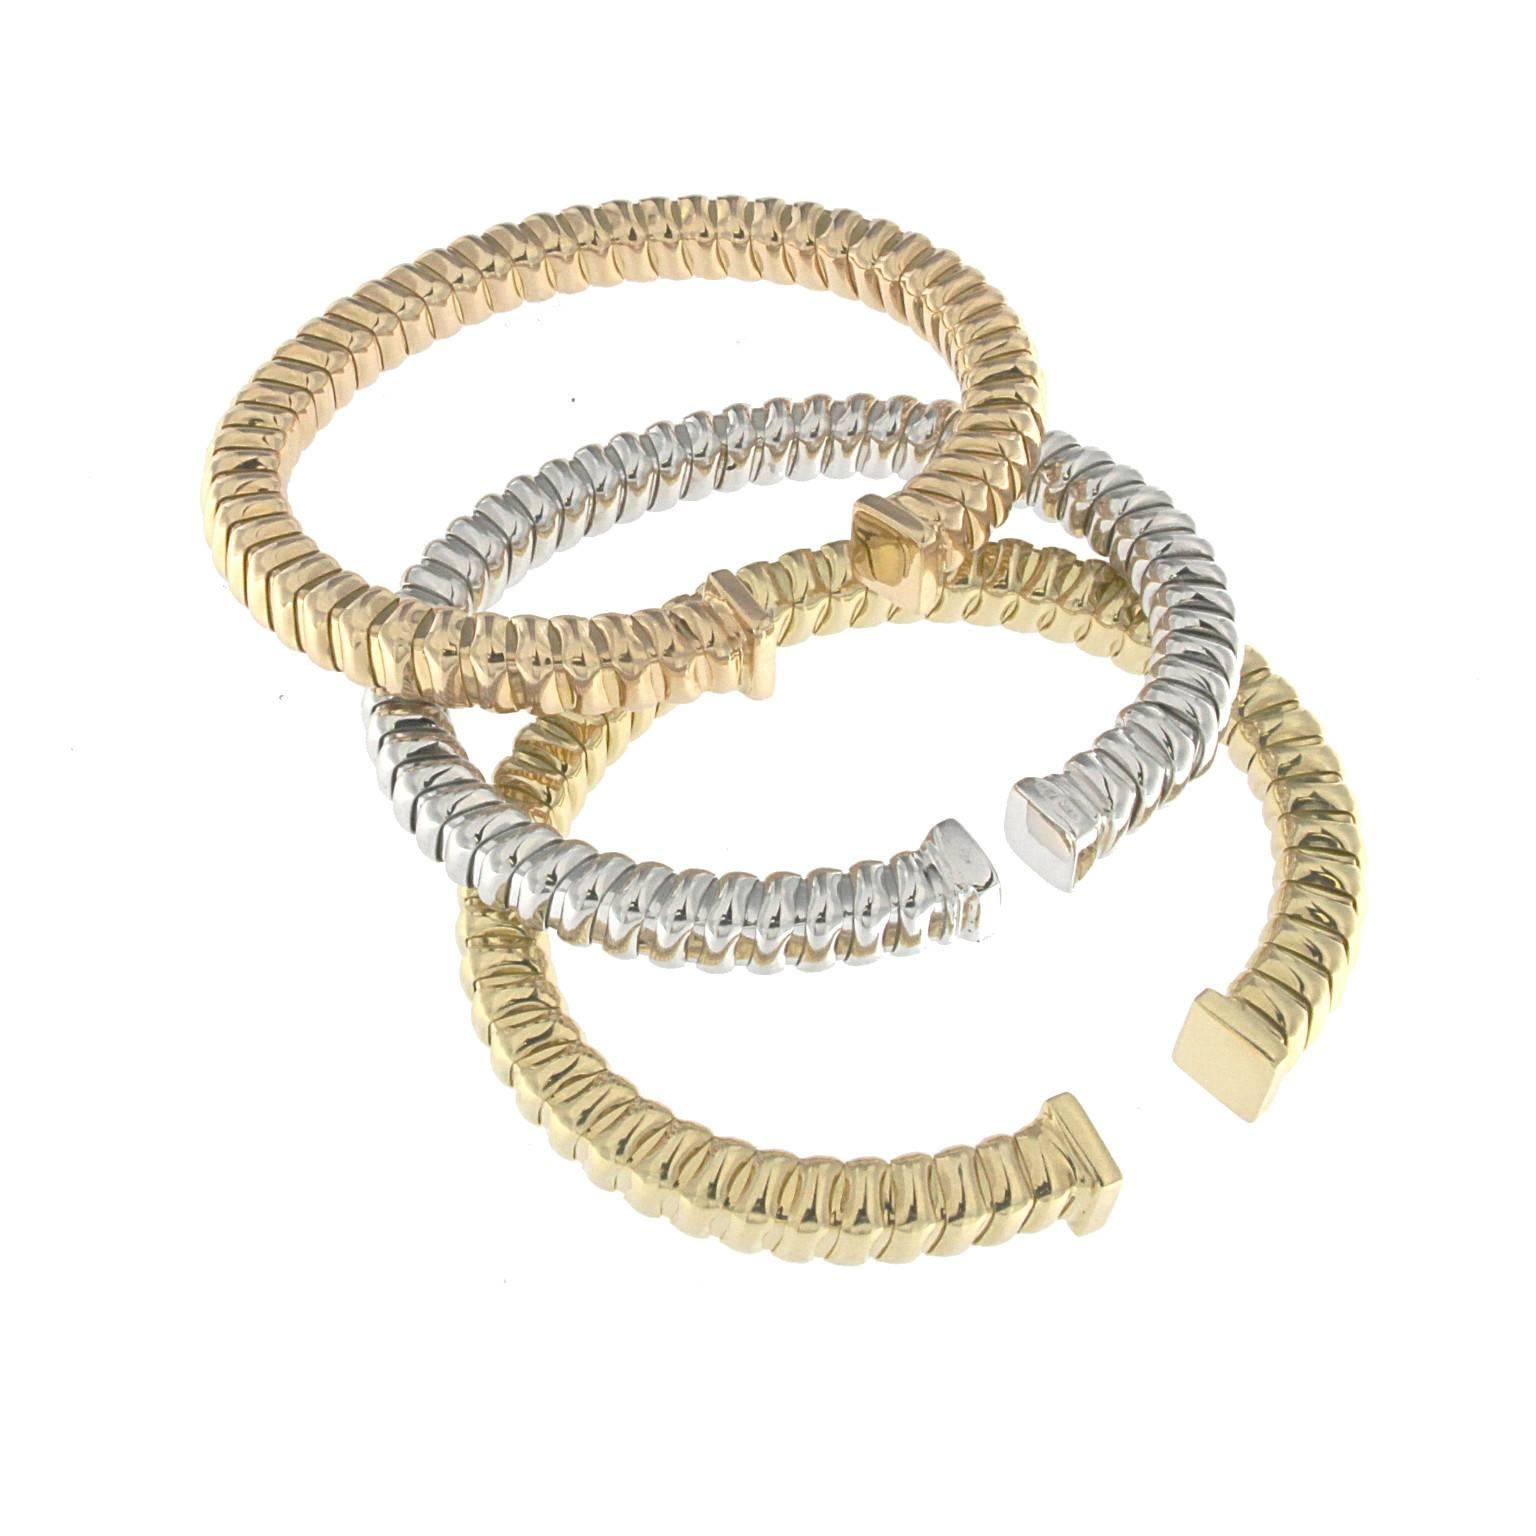 Tubogas bracelet on a square shape 0.5x0.5 in white 18 kt gold 
Diameter 5.5X4.5
the total weight is 31.90
Stamp 750 10MI

the 3 colors  are available